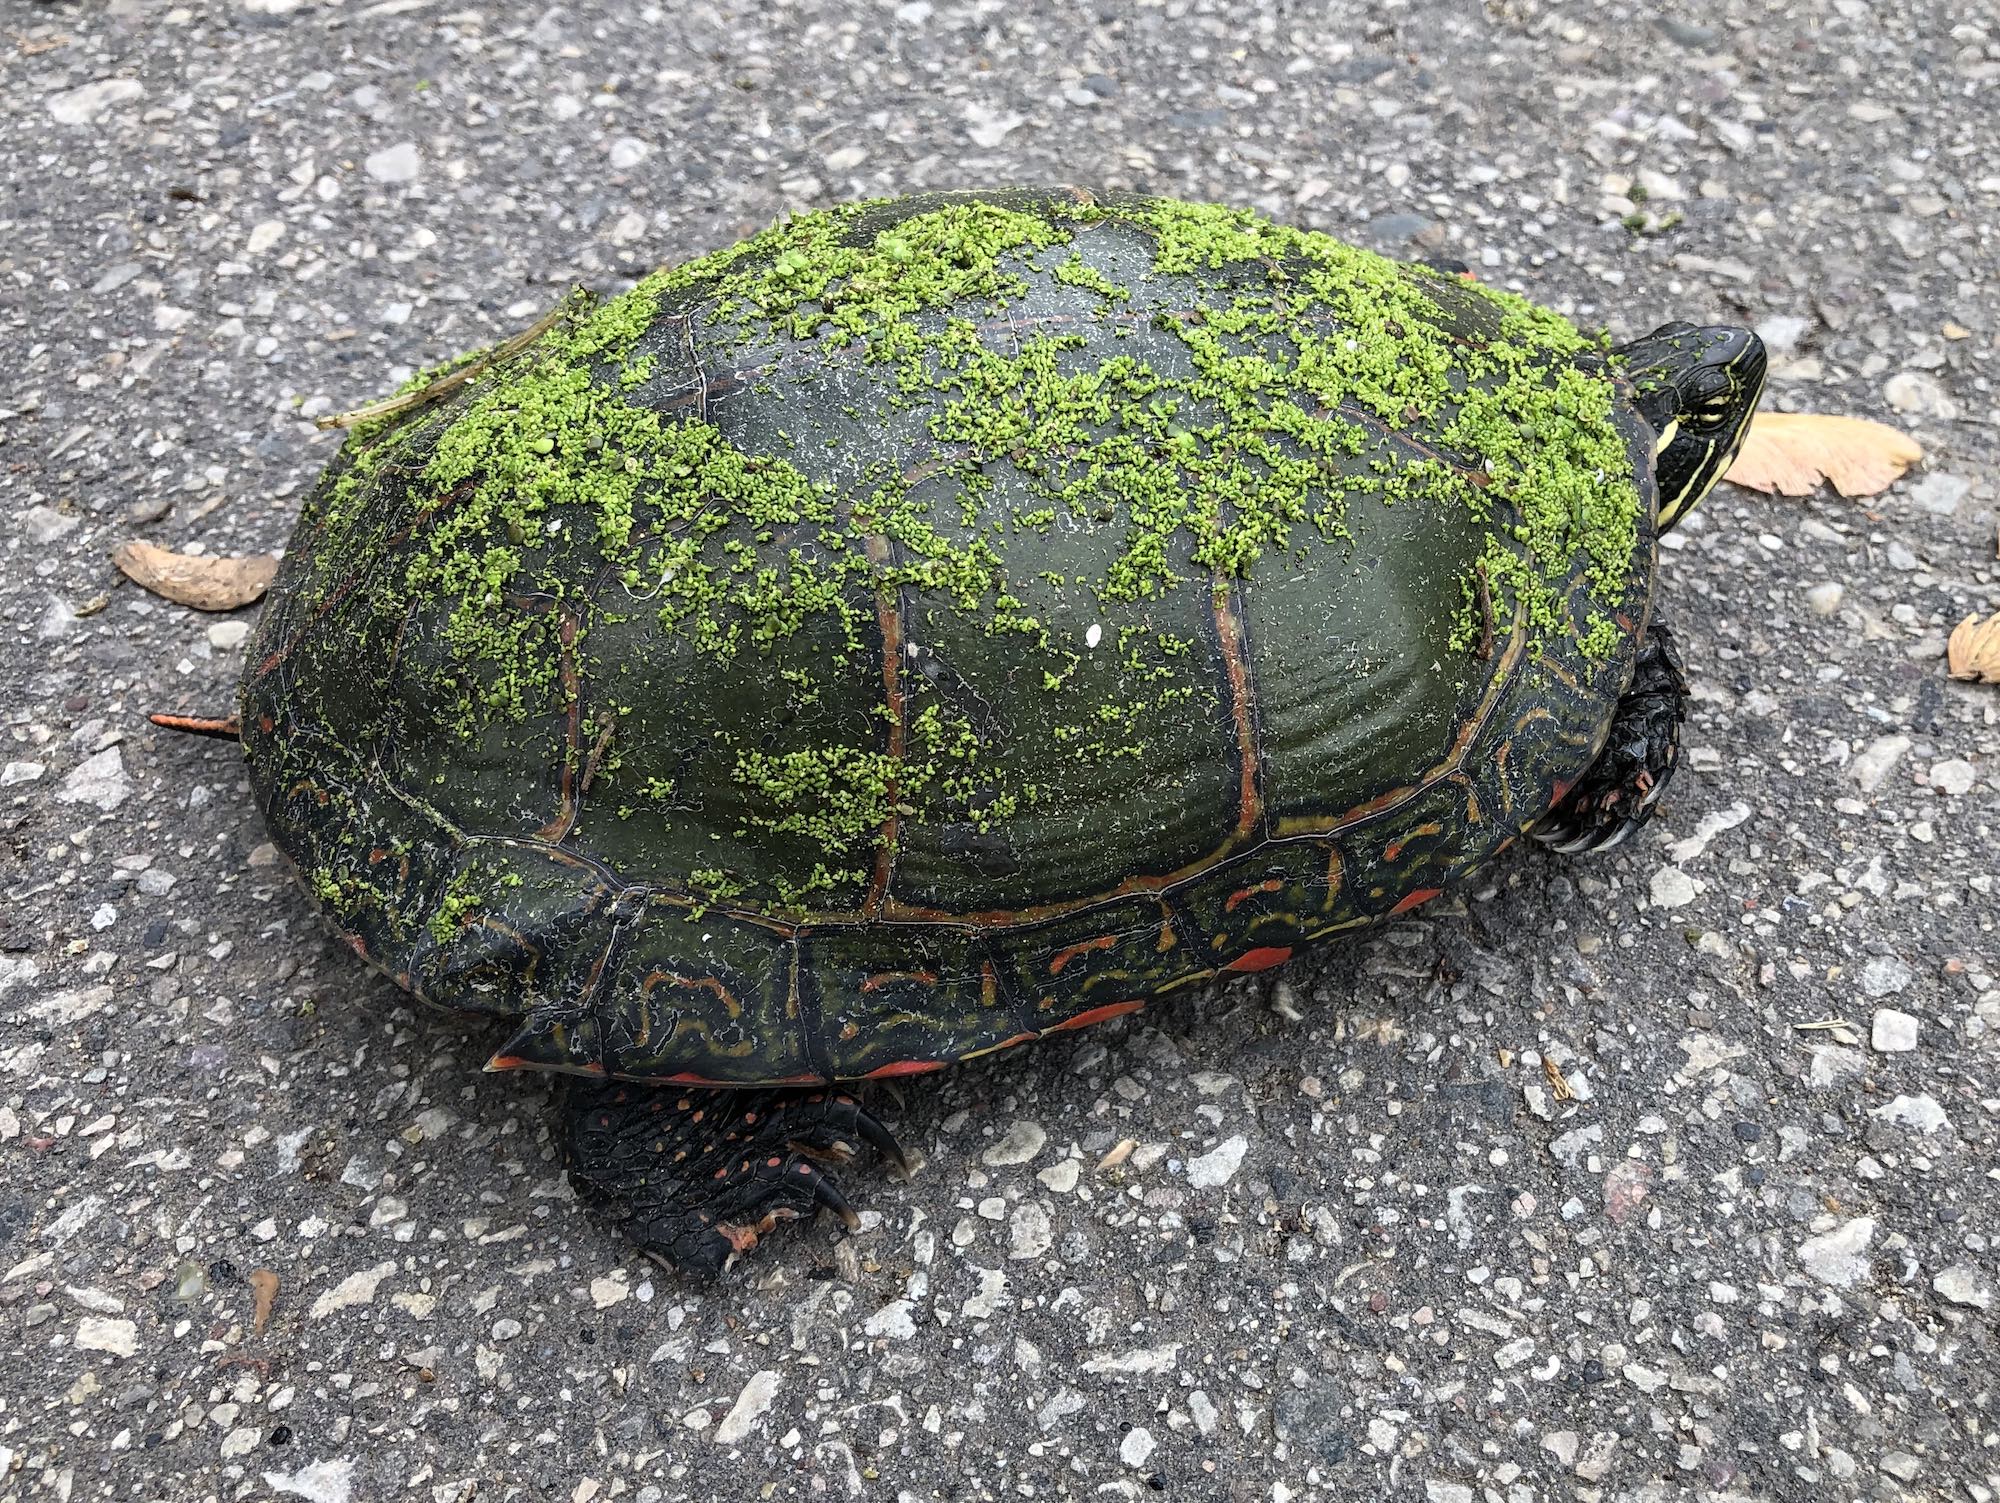 Painted Turtle on Woodrow Drive in Madison, Wisconsin on May 22, 2021.